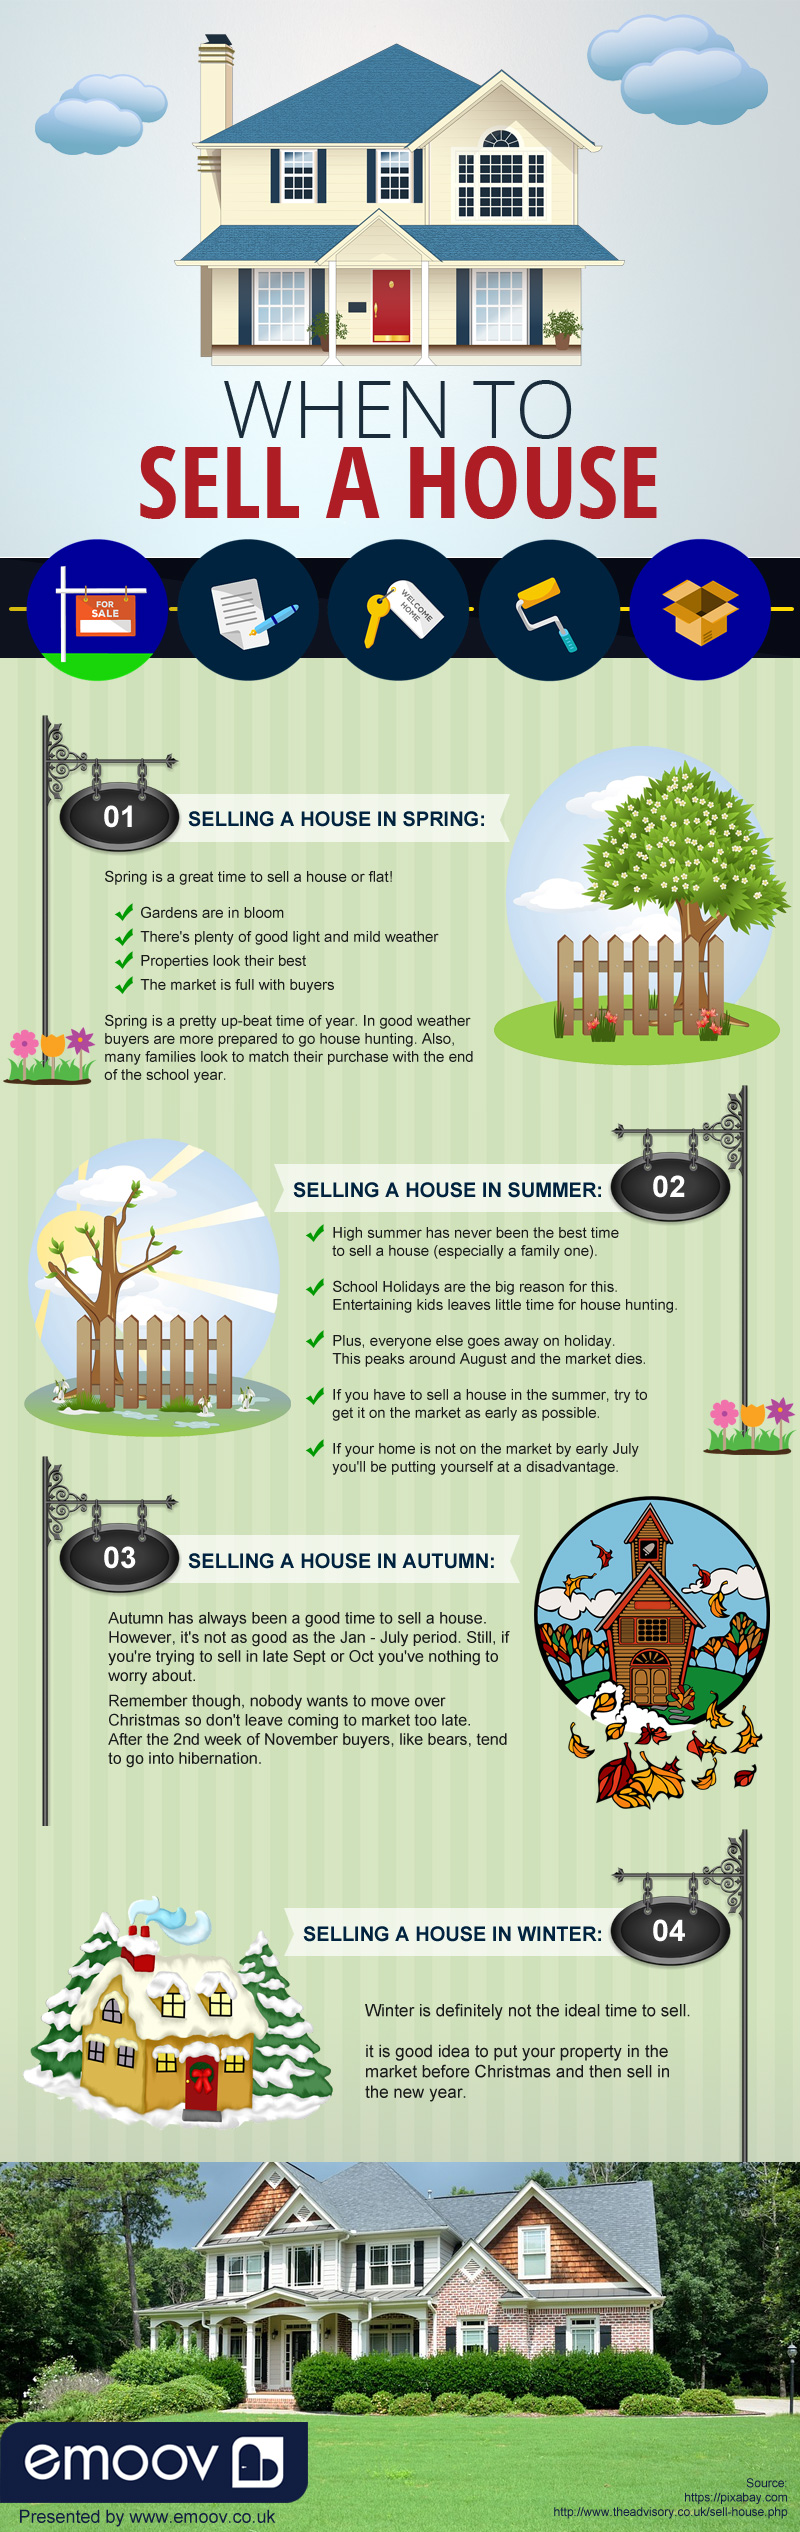 When to Sell a House